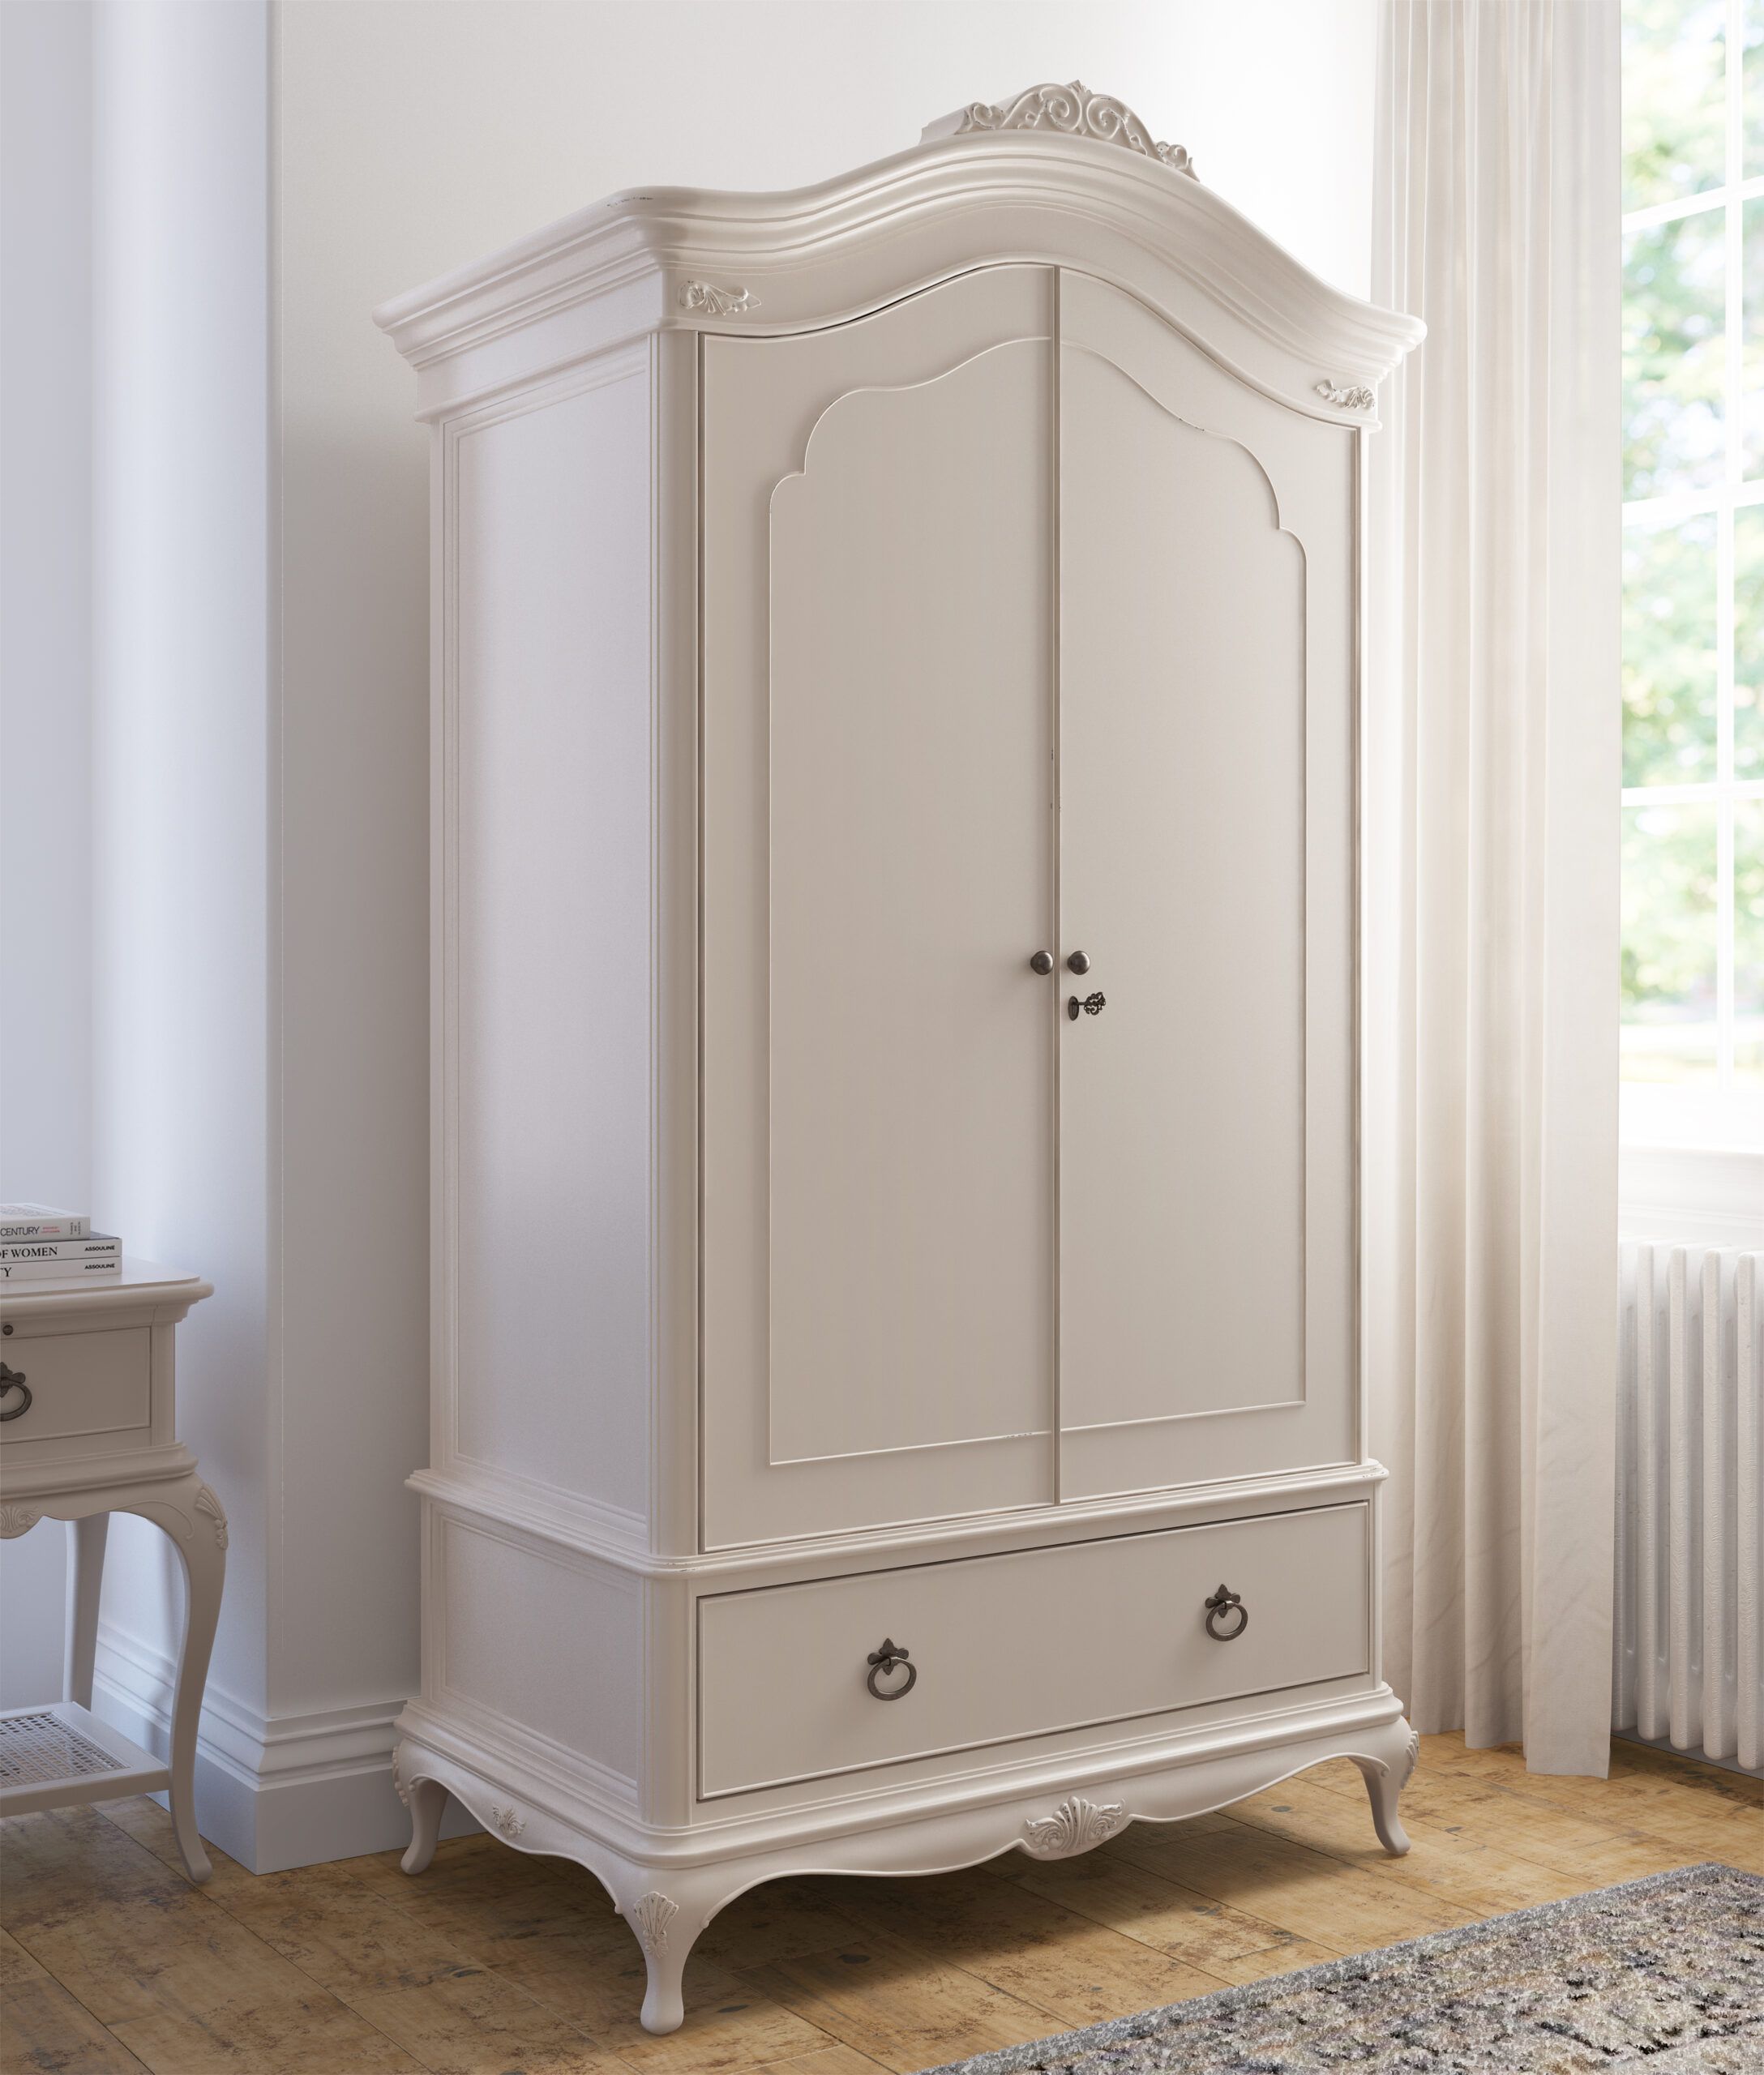 Willis & Gambier Ivory 2 Door 1 Drawer Double Wardrobe – Love The Bed Inside Shabby Chic Wardrobes For Sale (View 14 of 15)